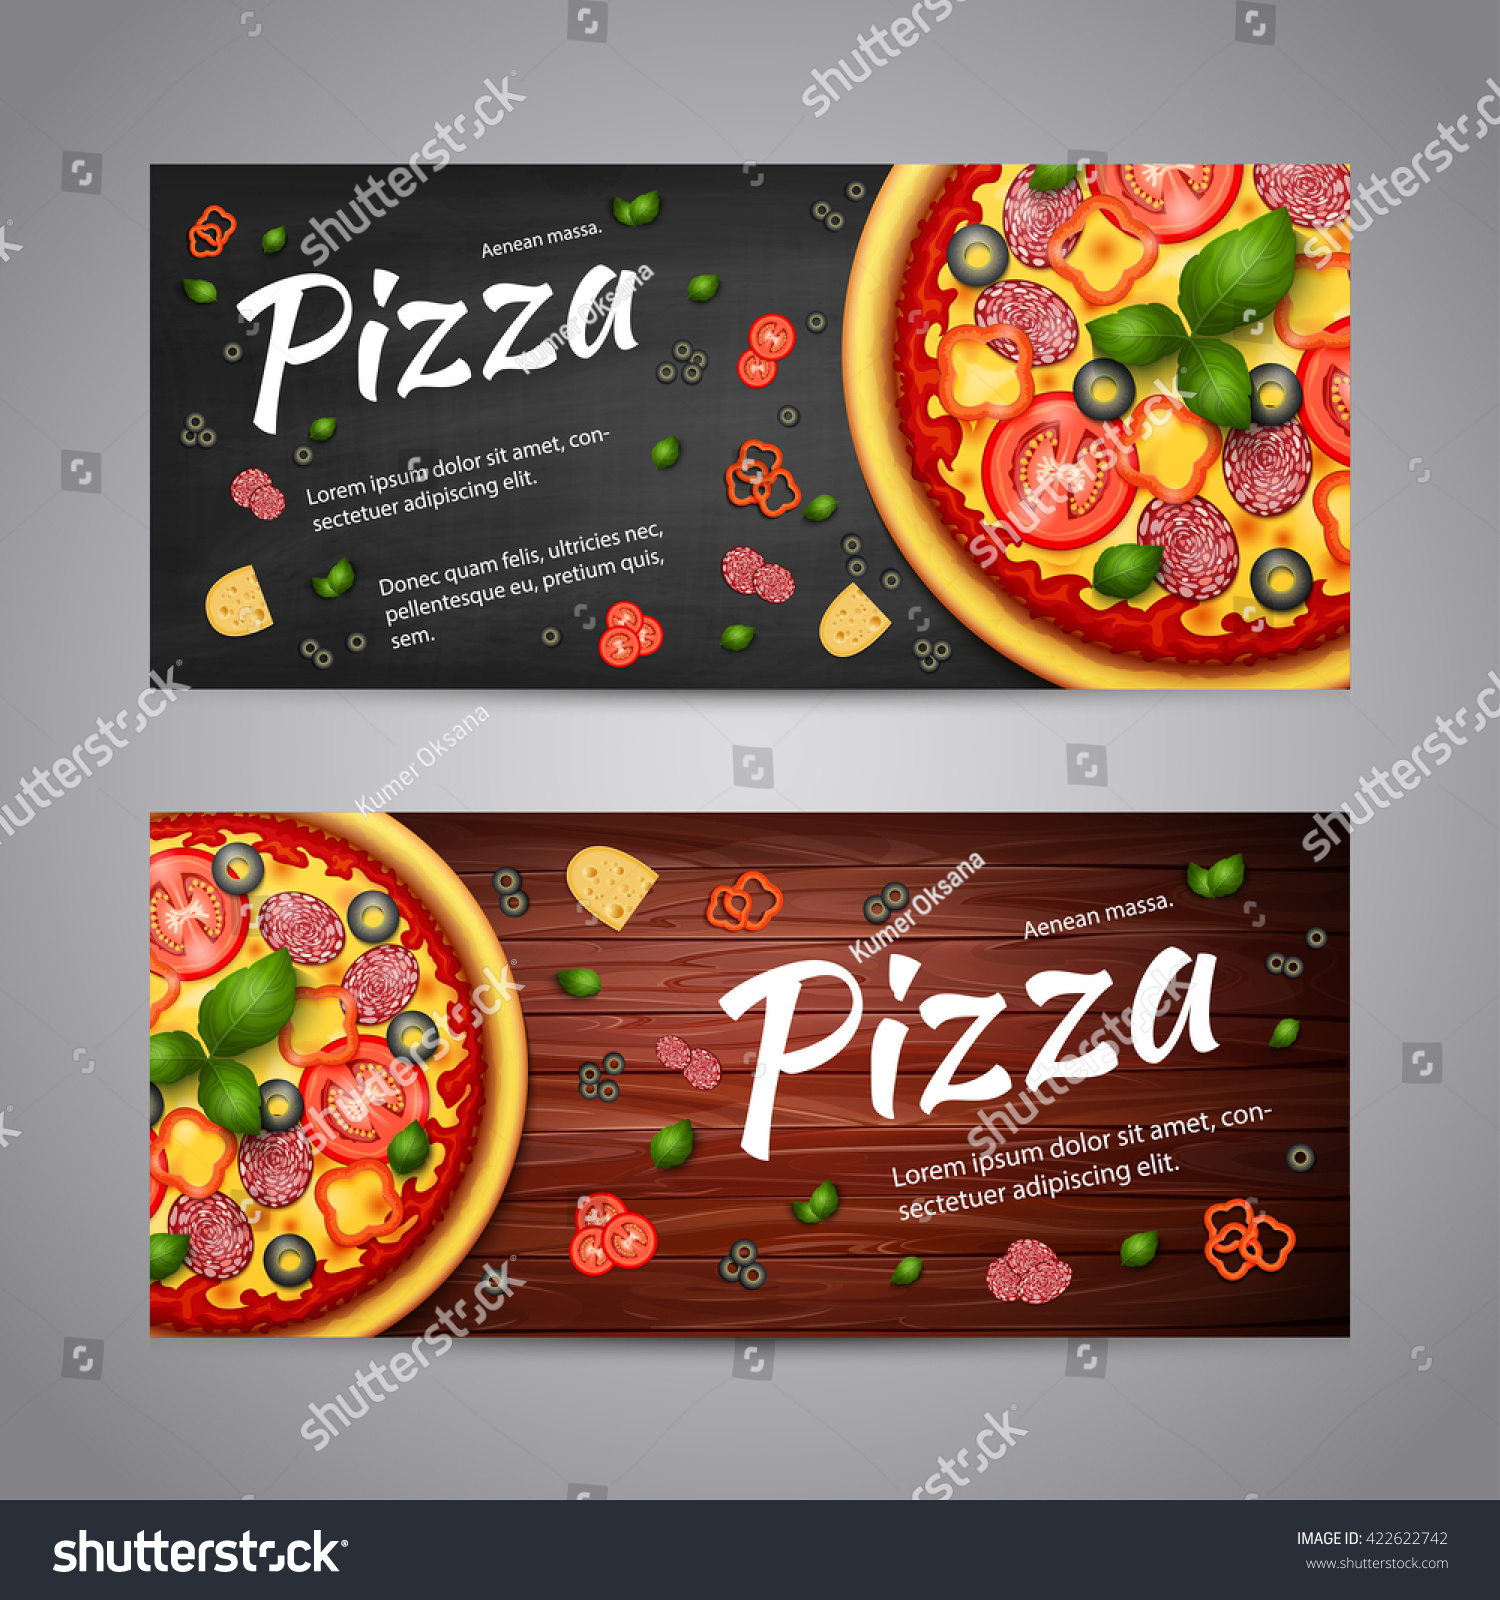 Realistic Pizza Pizzeria Flyer Vector Background Stock Vector Royalty Free